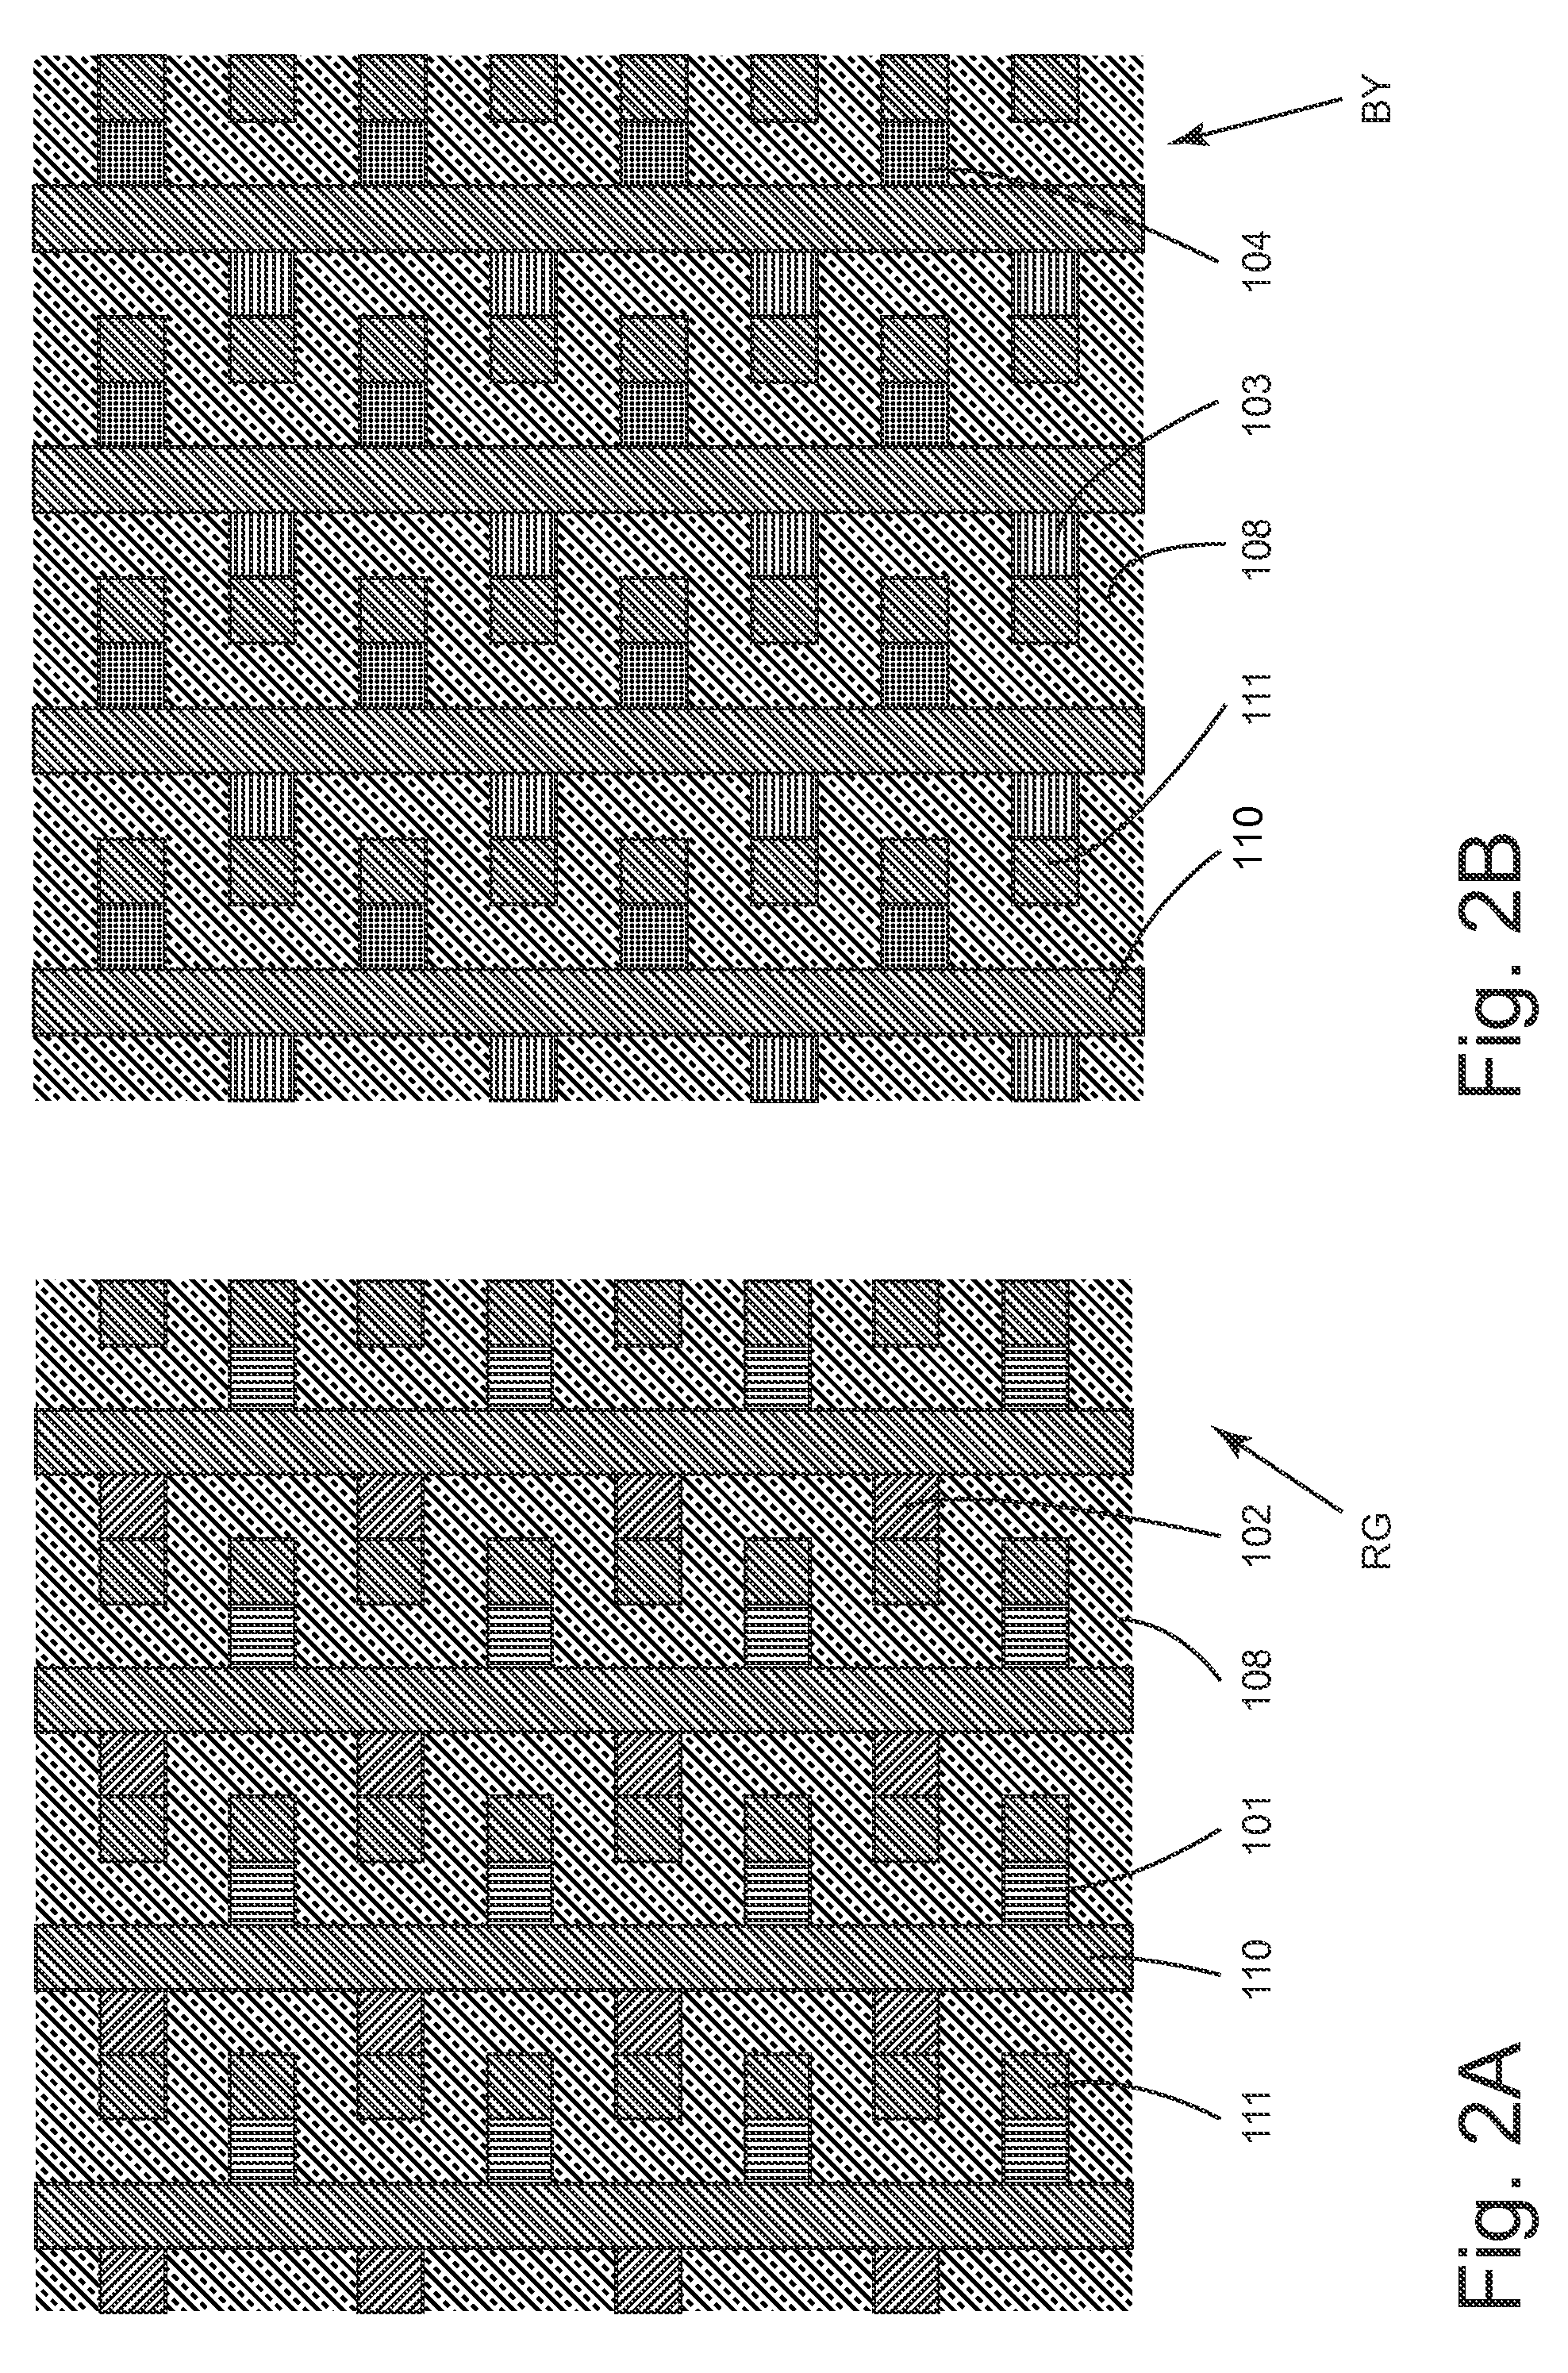 Volumetric three-dimensional display with evenly-spaced elements